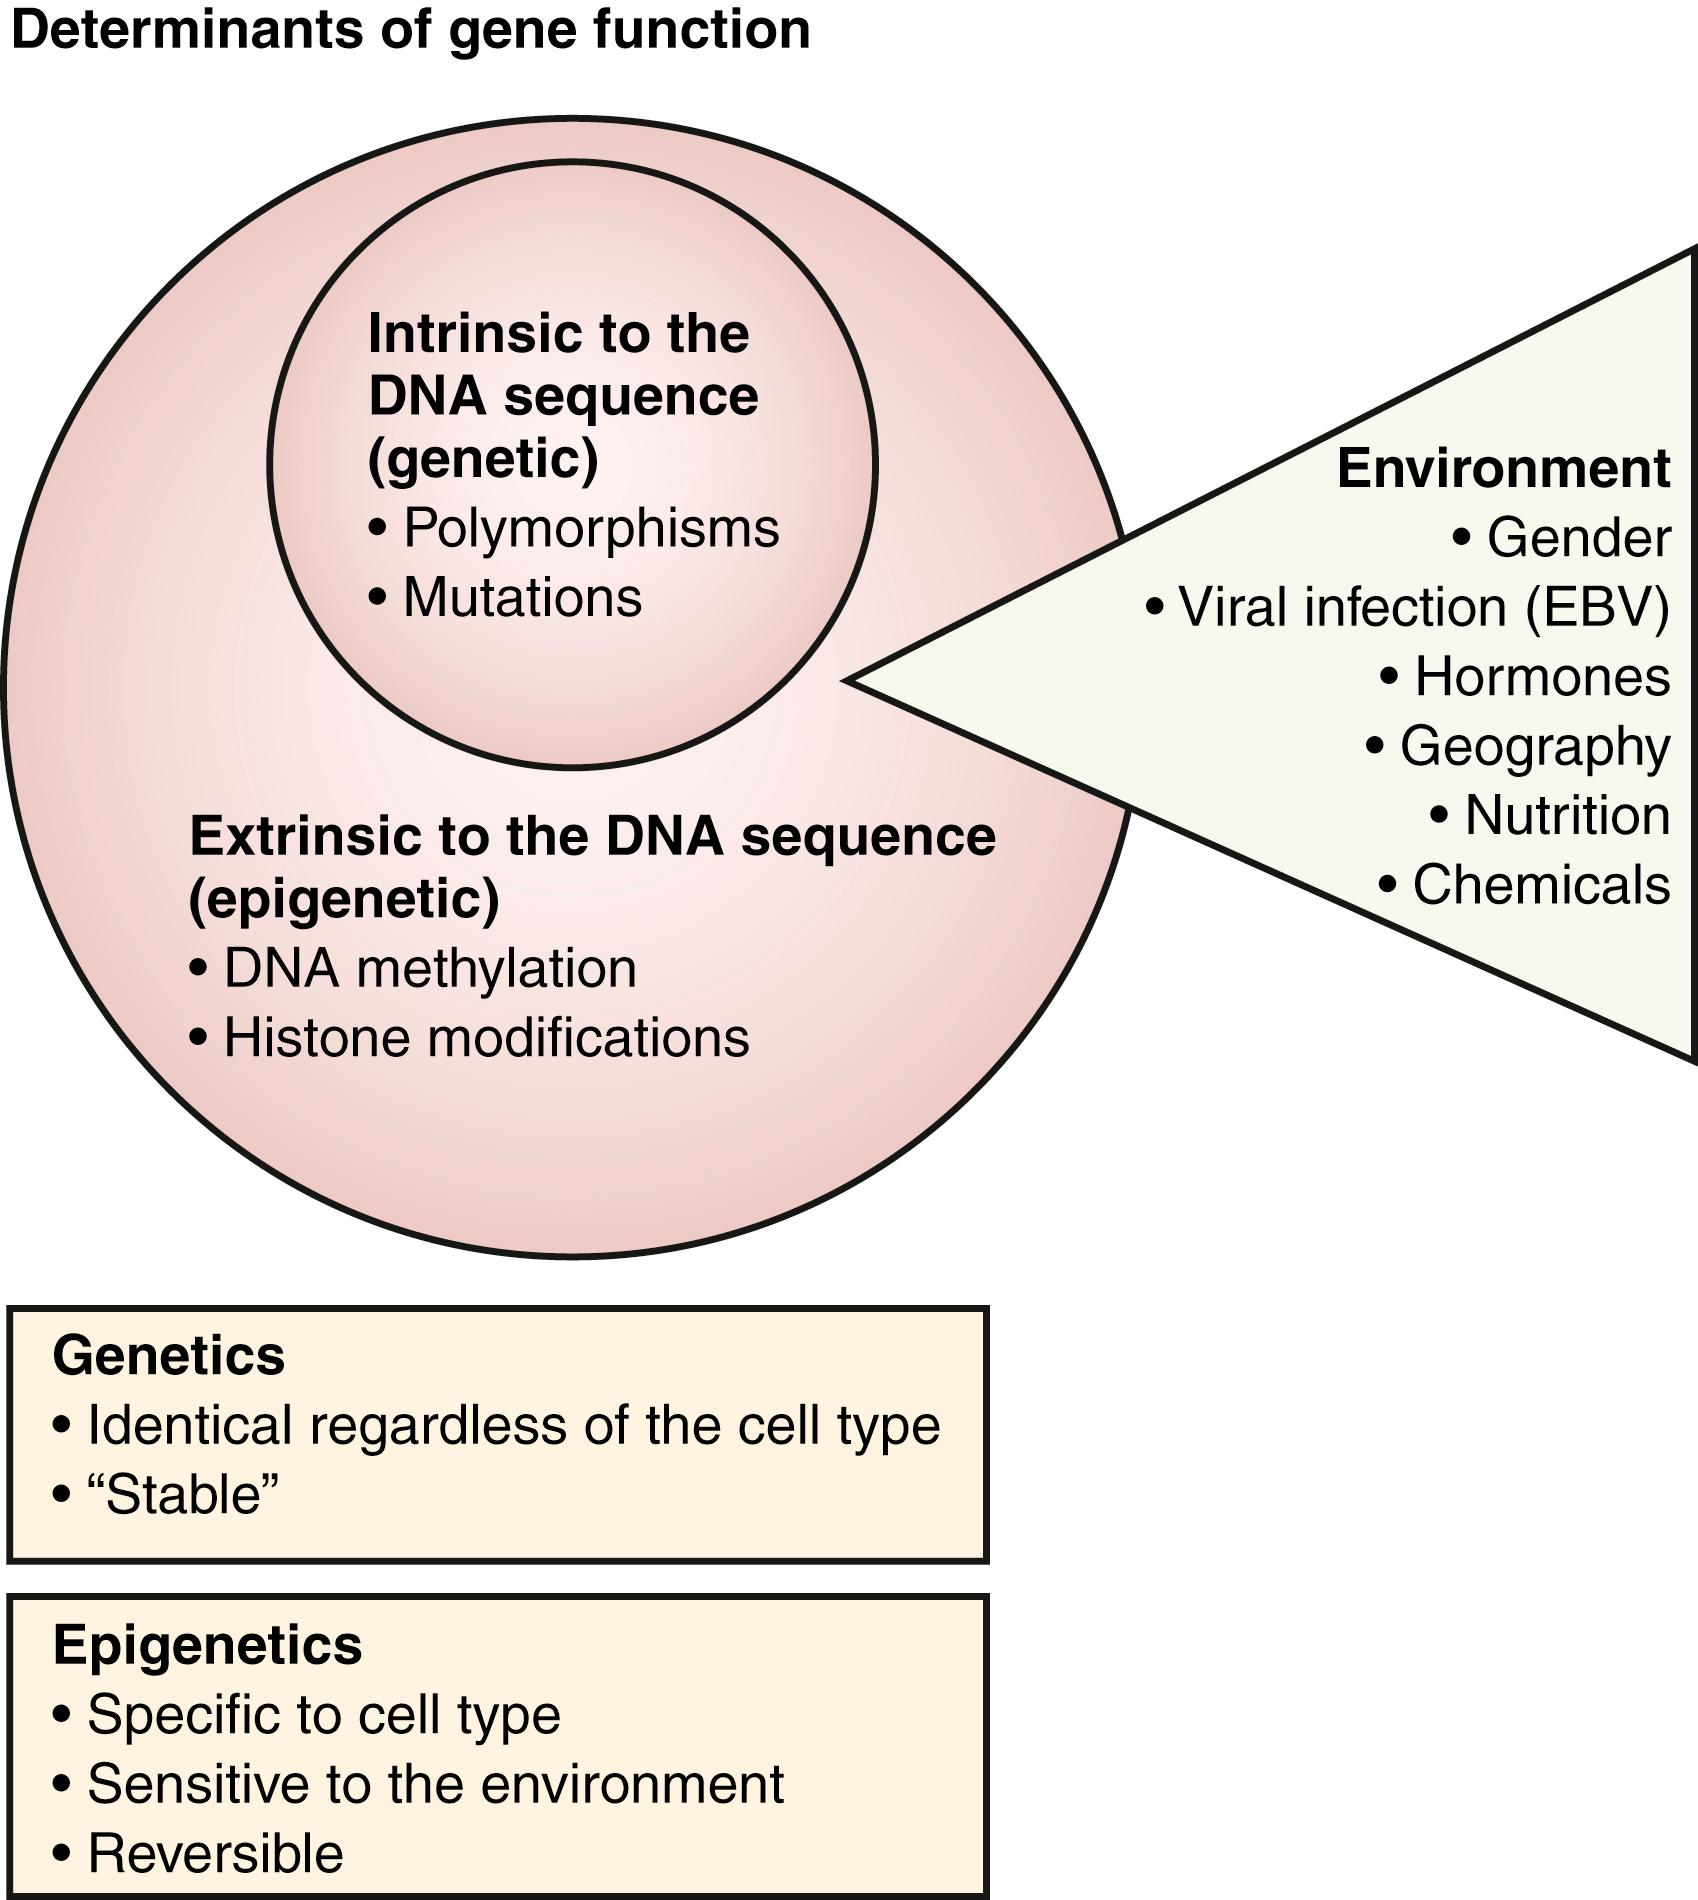 Fig. 23.1, Determinants of gene function. Genetic and epigenetic components determine gene function in health and disease. DNA sequence changes (including polymorphisms and mutations) can be considered intrinsic to the DNA sequence, whereas DNA methylation and histone modification, that is, the major epigenetic modifications, are extrinsic to the DNA sequence. Epigenetic modifications are far more sensitive to environmental stimuli than the sequence of DNA. EBV, Epstein–Barr virus.